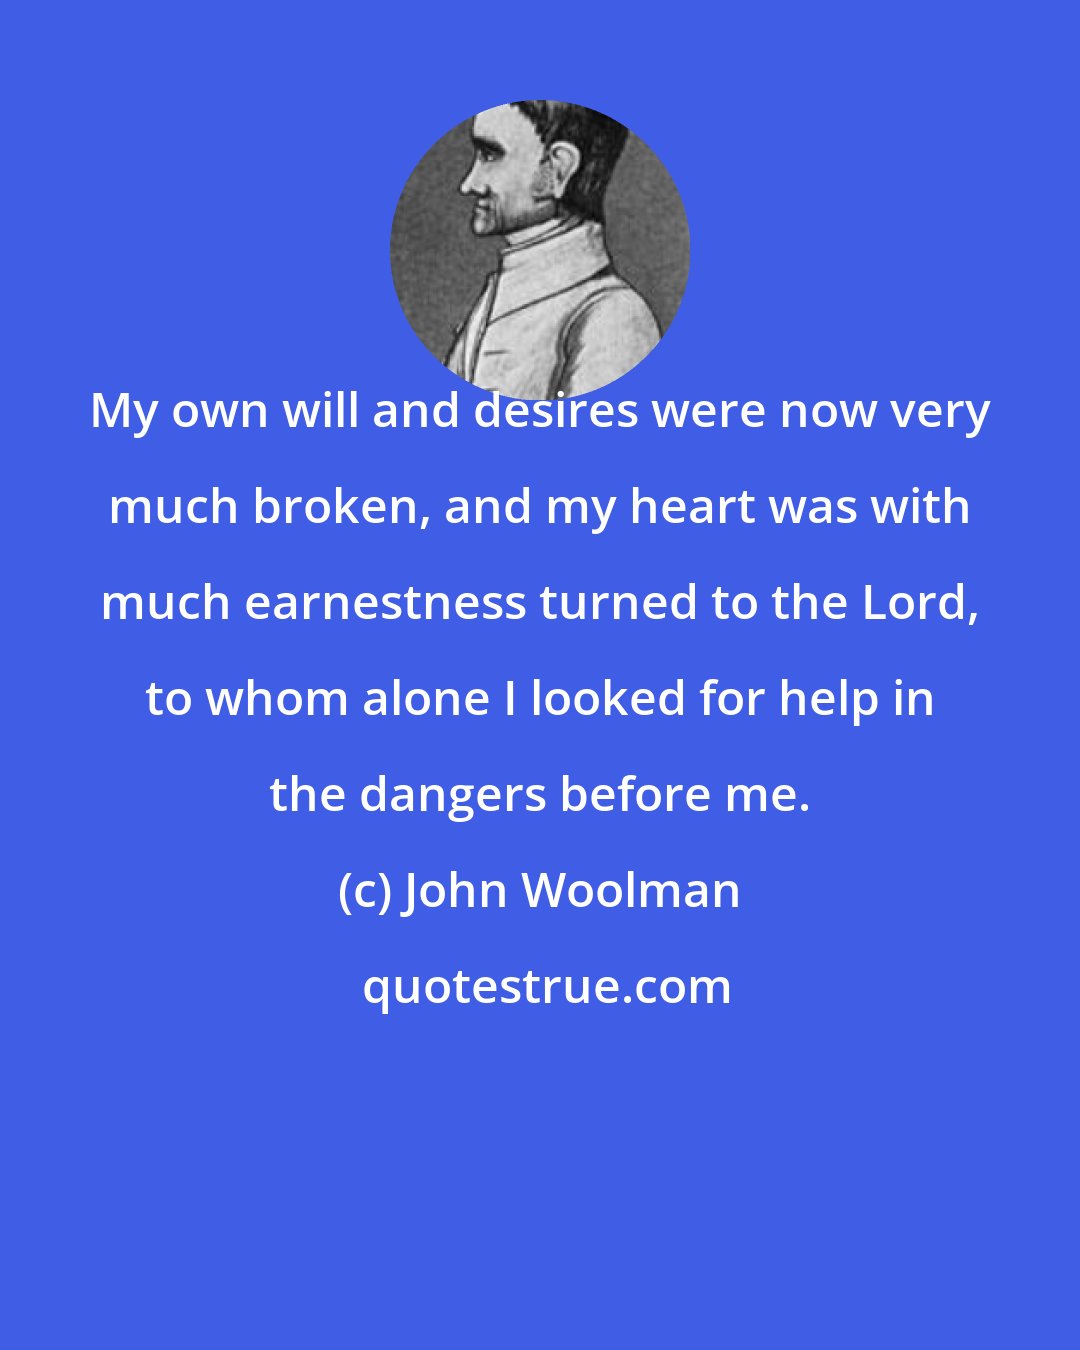 John Woolman: My own will and desires were now very much broken, and my heart was with much earnestness turned to the Lord, to whom alone I looked for help in the dangers before me.